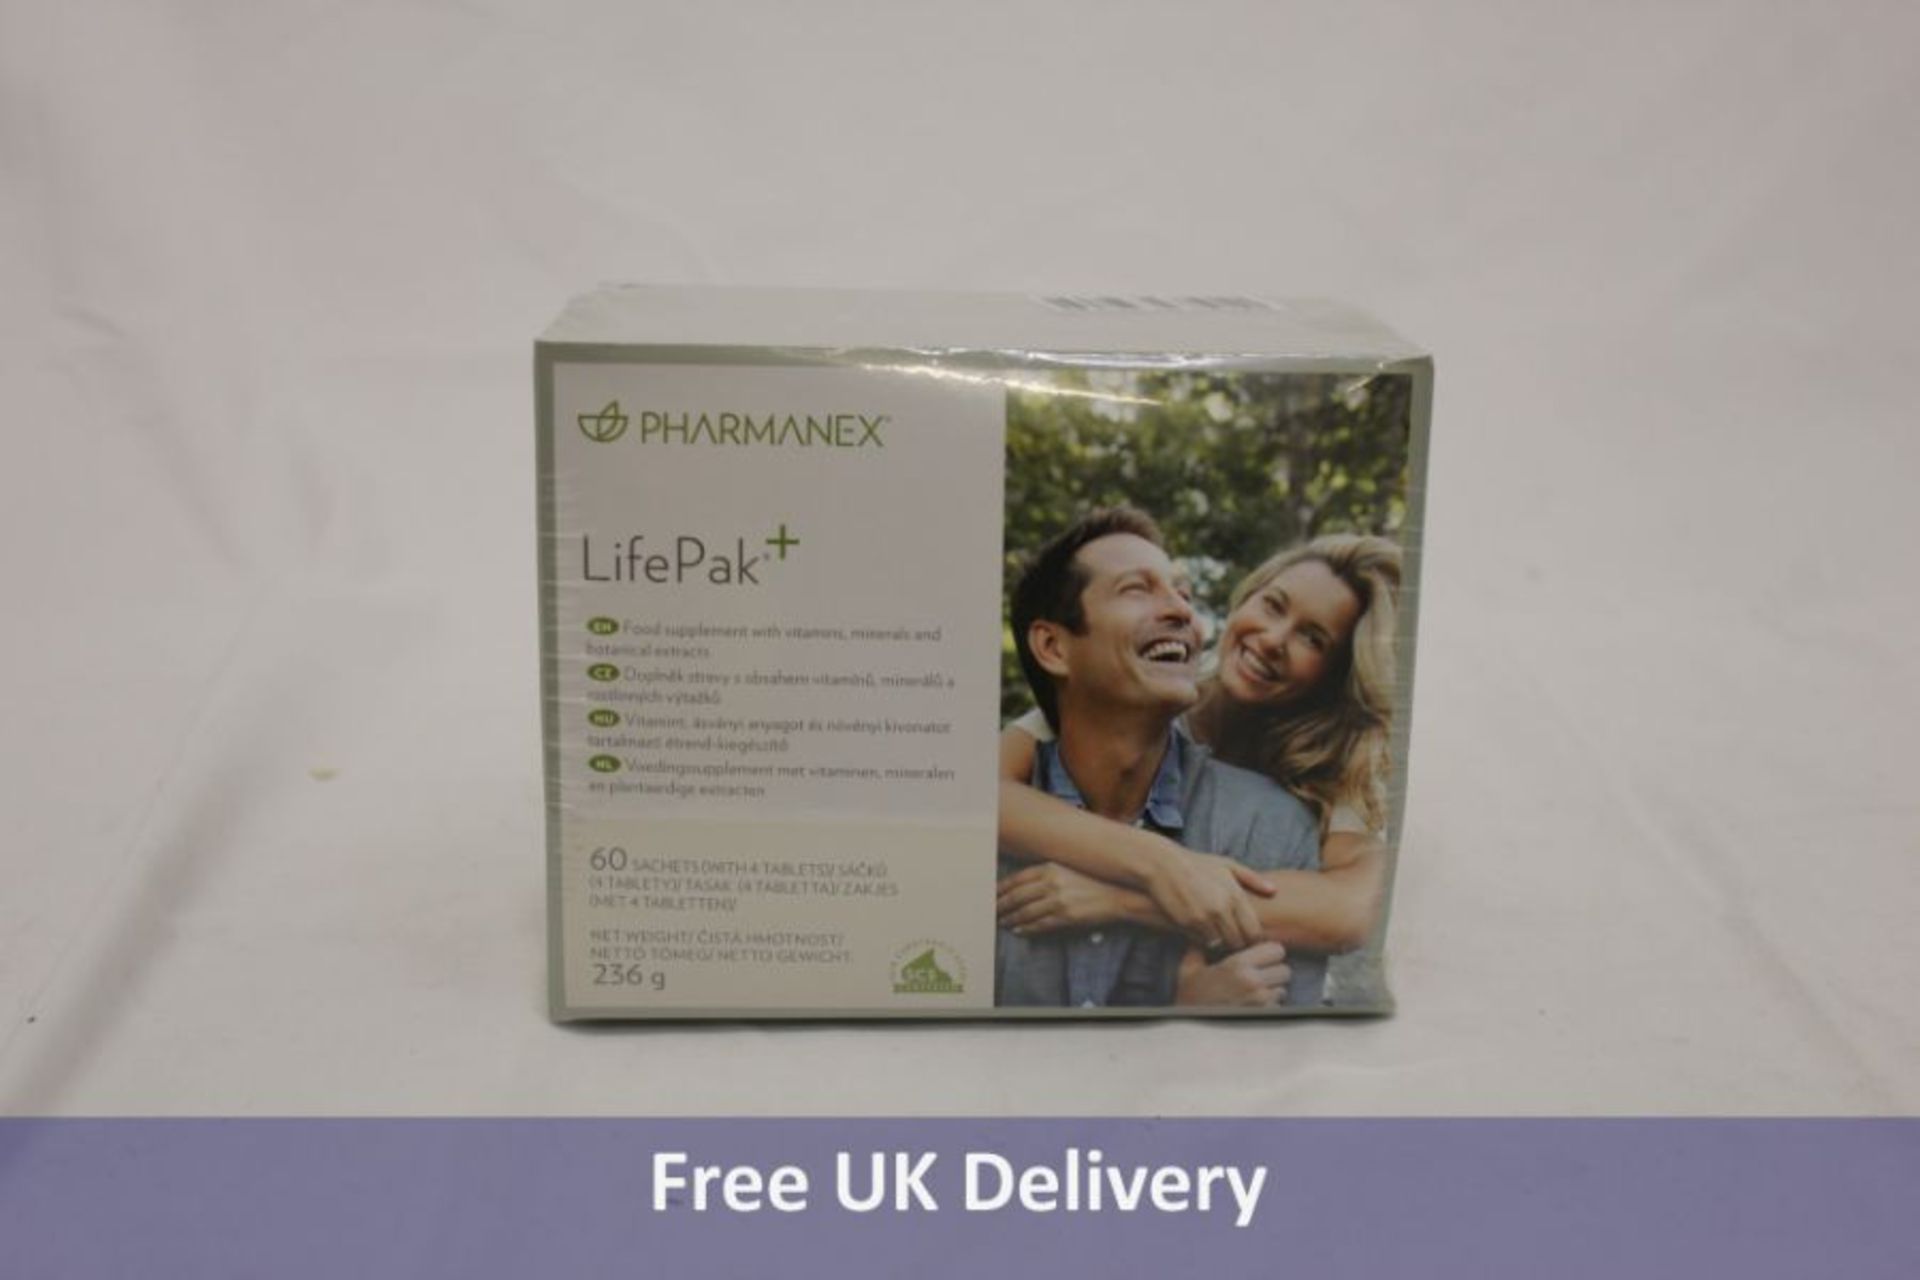 Pharmanex Life Pak Food Supplement with Vitamins, Minerals and Botanical Extracts